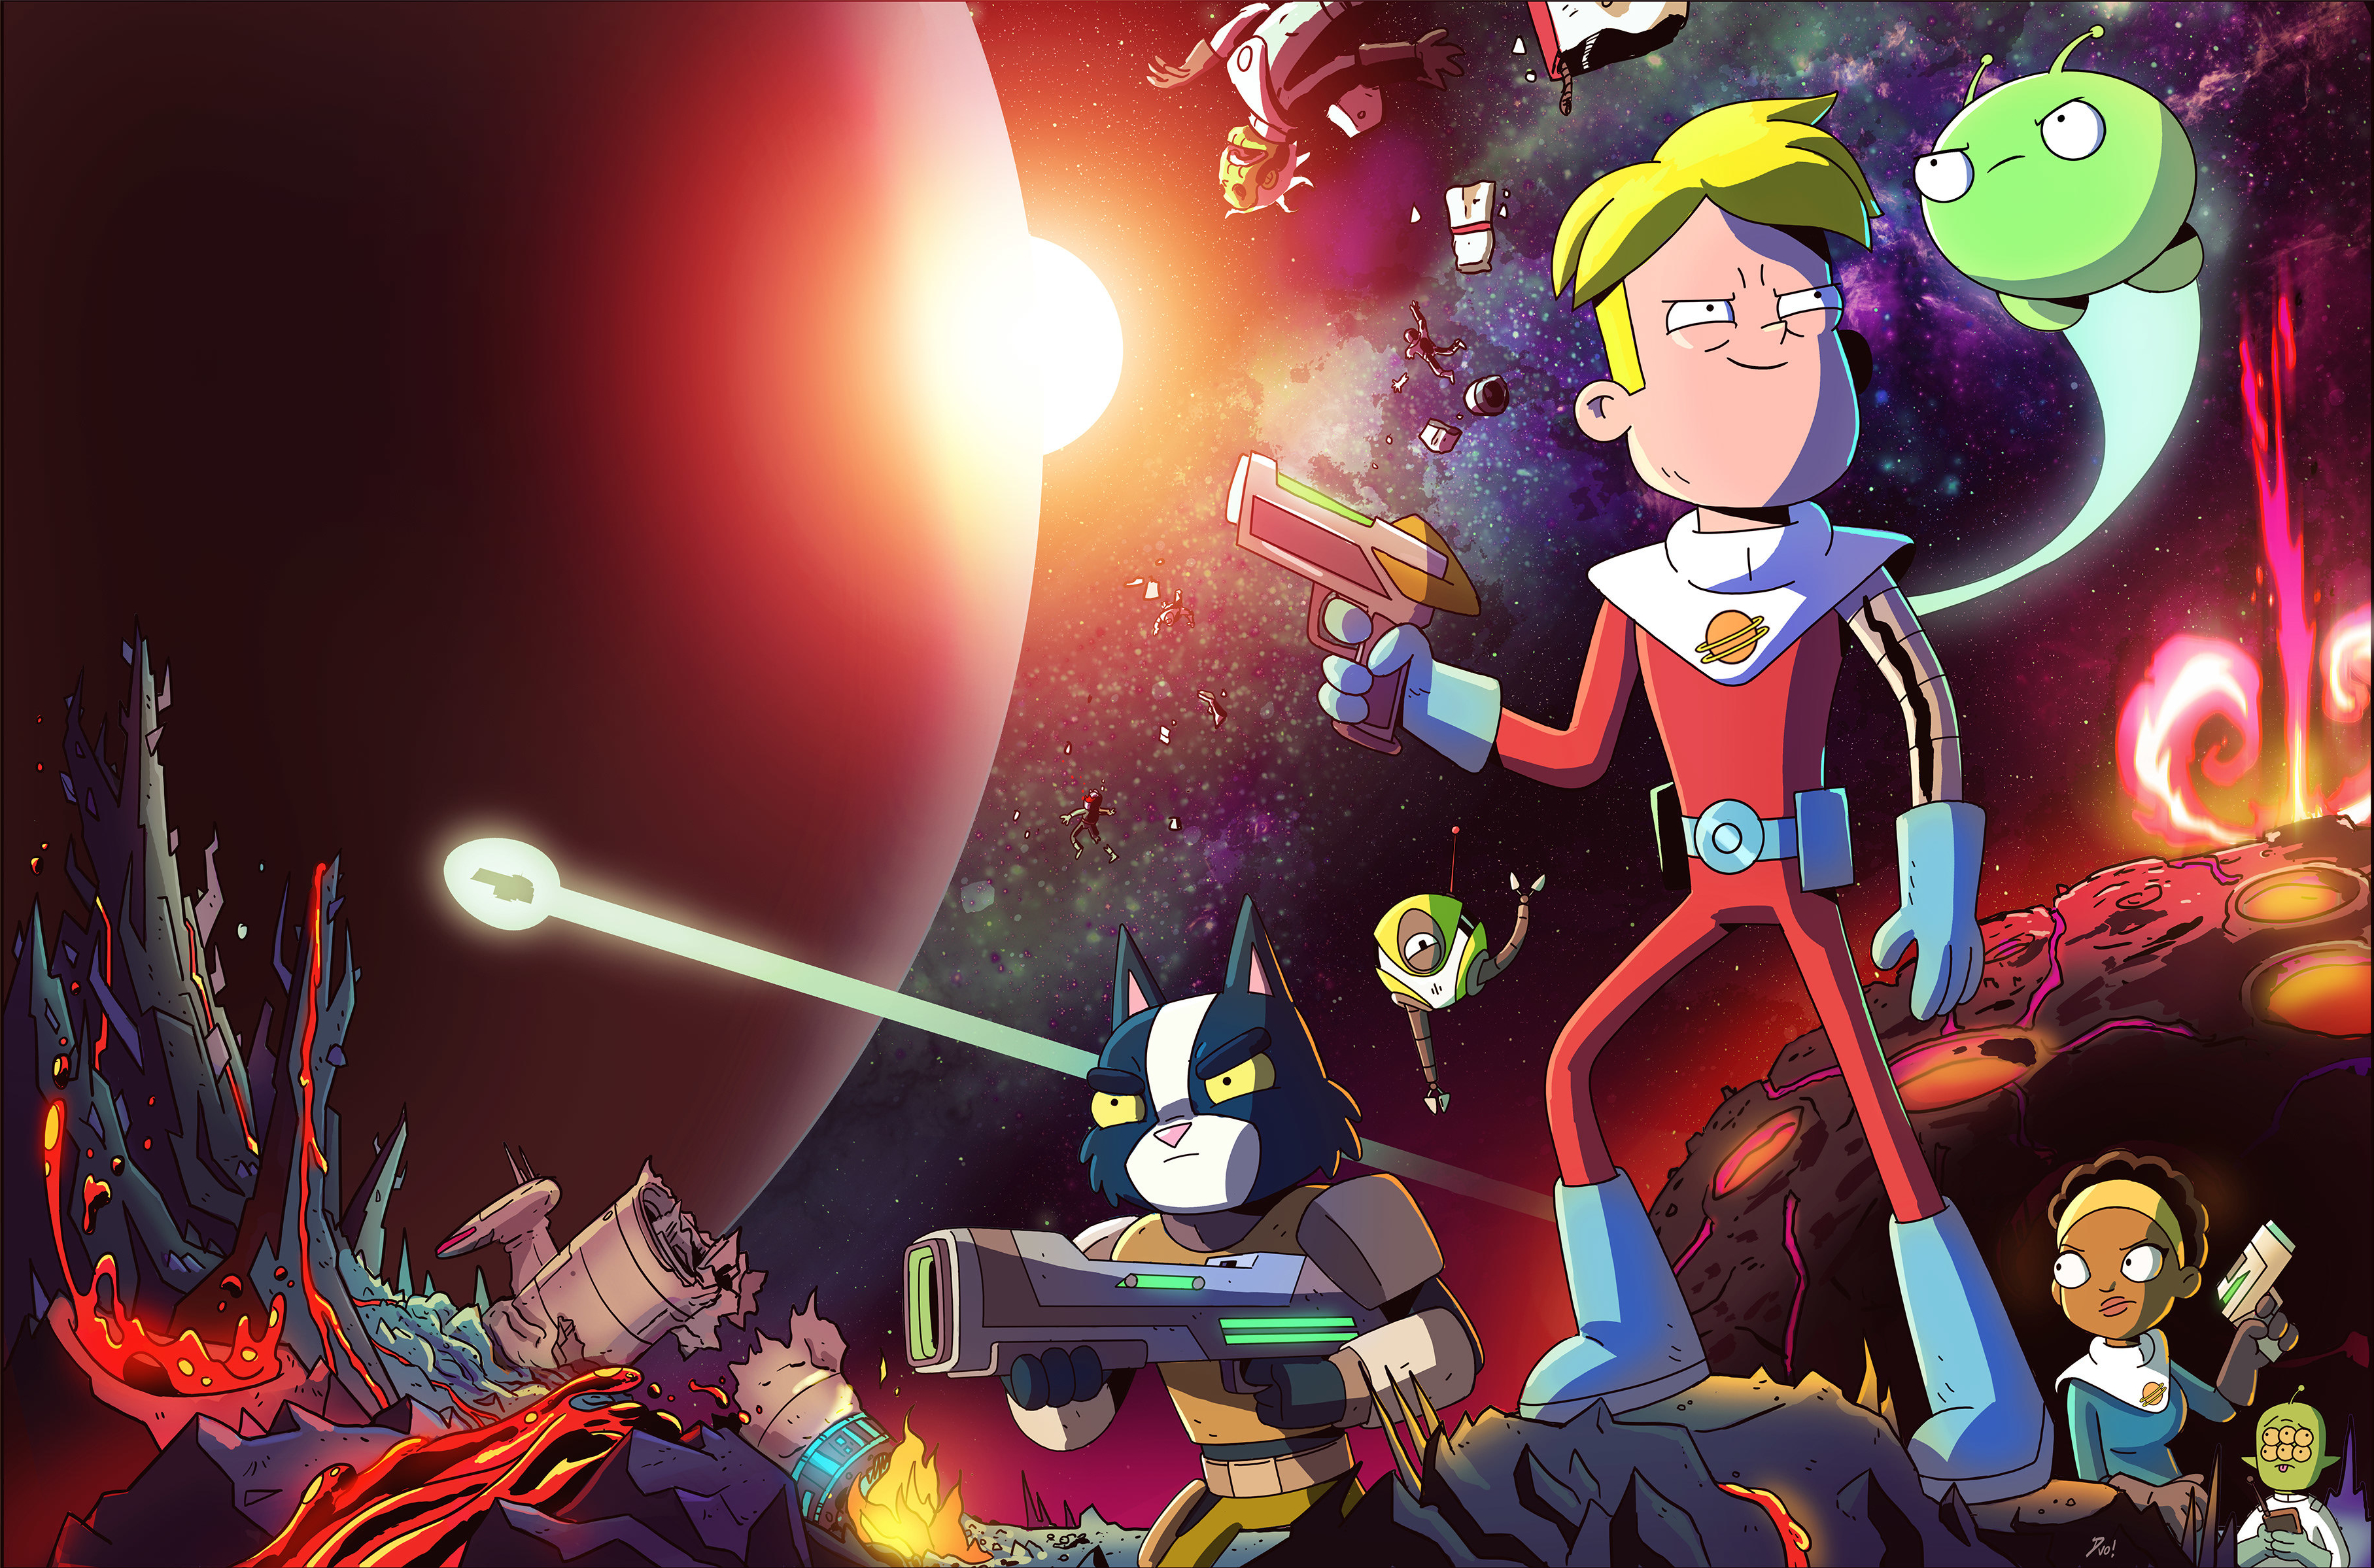 Avocato Final Space Final Space Gary Goodspeed Kvn Final Space Mooncake Final Space Quinn Airgon Tri 3630x2398